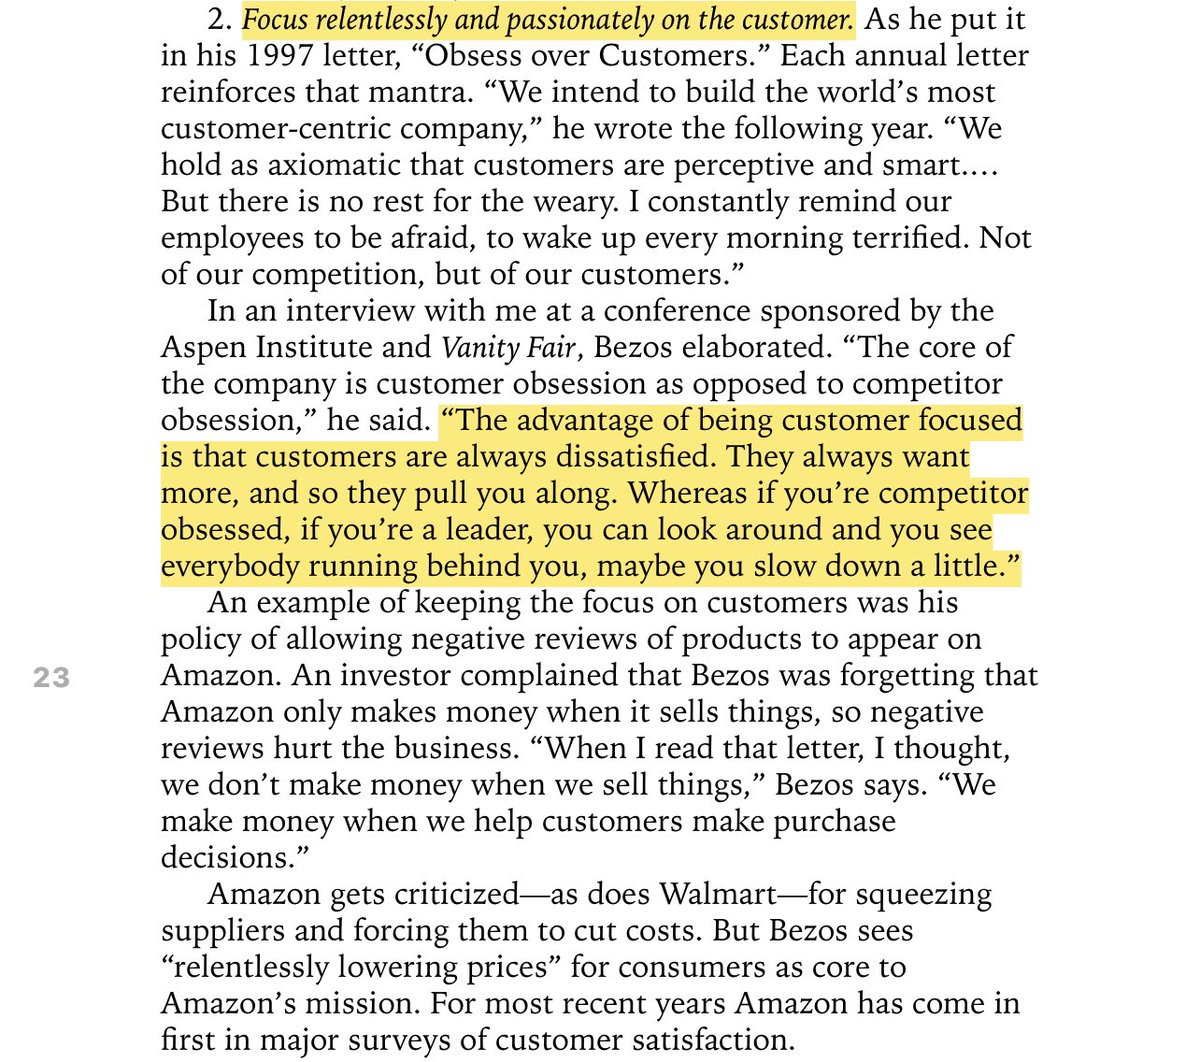 “2. Focus relentlessly and passionately on the customer... “The advantage of being customer focused is that customers are always dissatisfied. They always want more, and so they pull you along... if you’re competitor obsessed, if you’re a leader,... maybe you slow down a little””